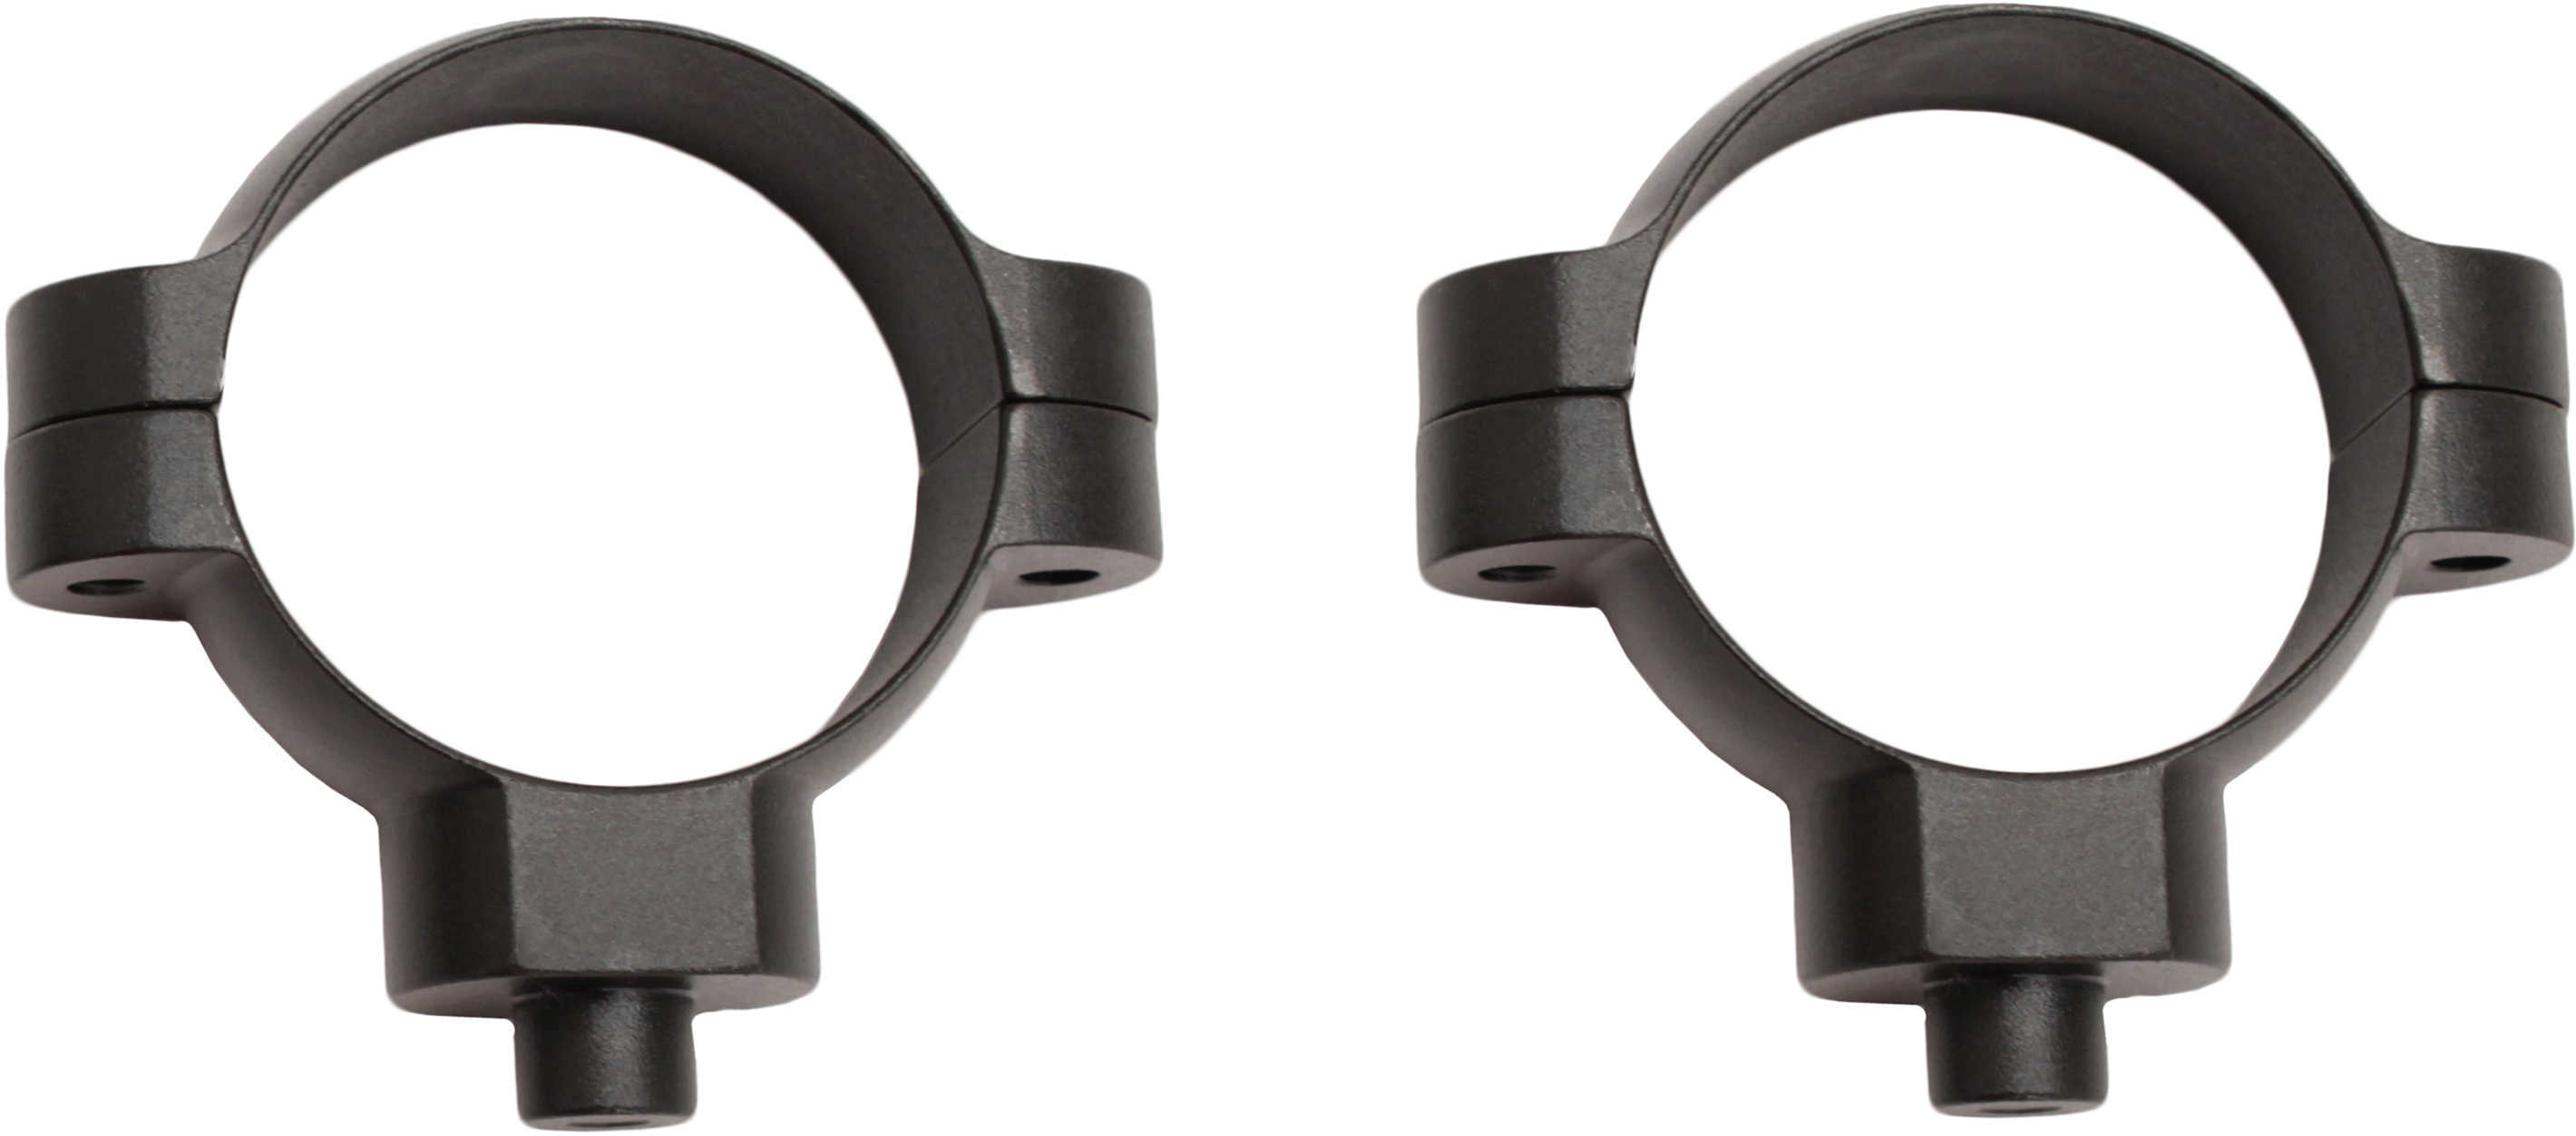 Leupold Quick Release Riings, 34mm, High